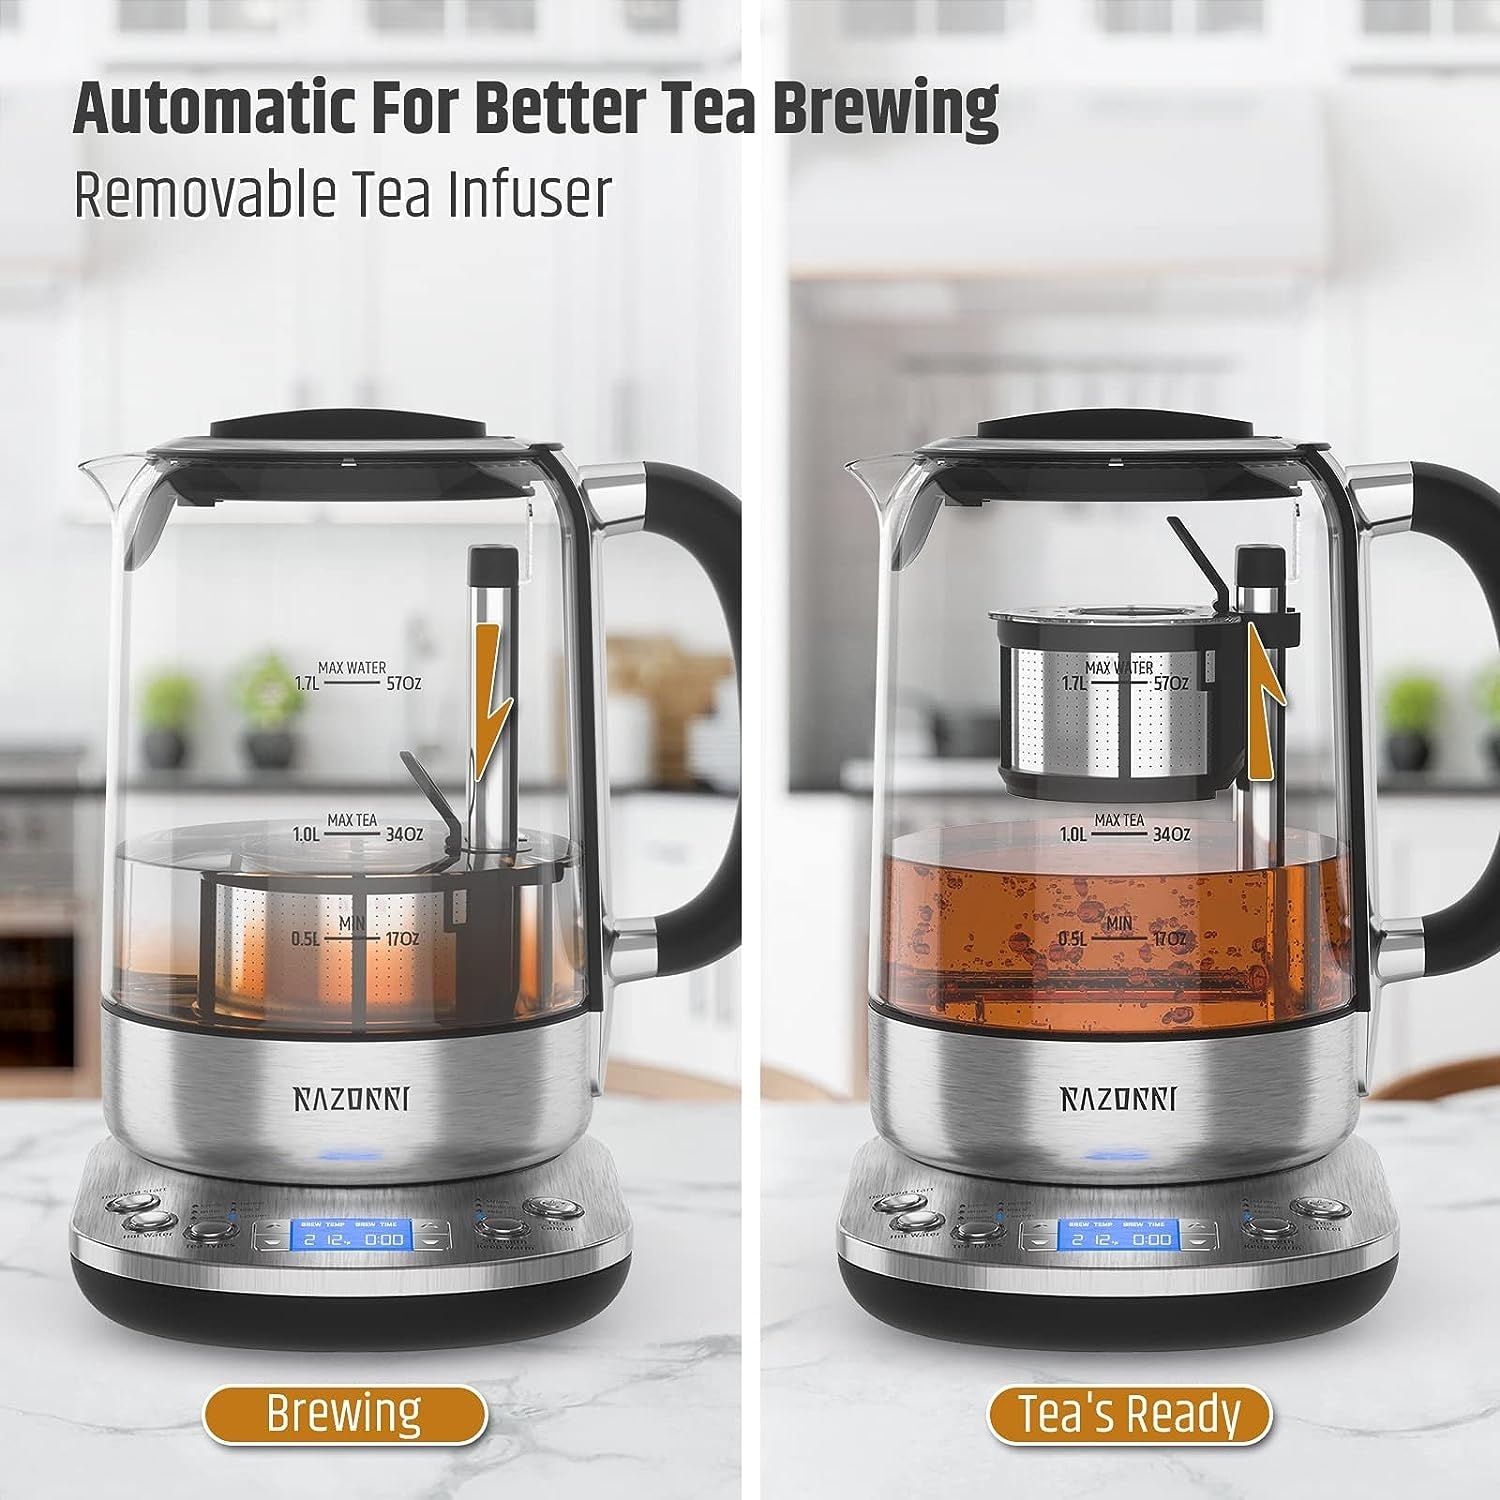 https://ak1.ostkcdn.com/images/products/is/images/direct/1c9db8bf368e1748e23b0f2216e44d699e96ee93/Razorri-Electric-Tea-Maker-1.7L-with-Automatic-Infuser-for-Tea-Brewing%2C-Presets-for-5-Tea-Types-and-3-Brew-Strengths.jpg